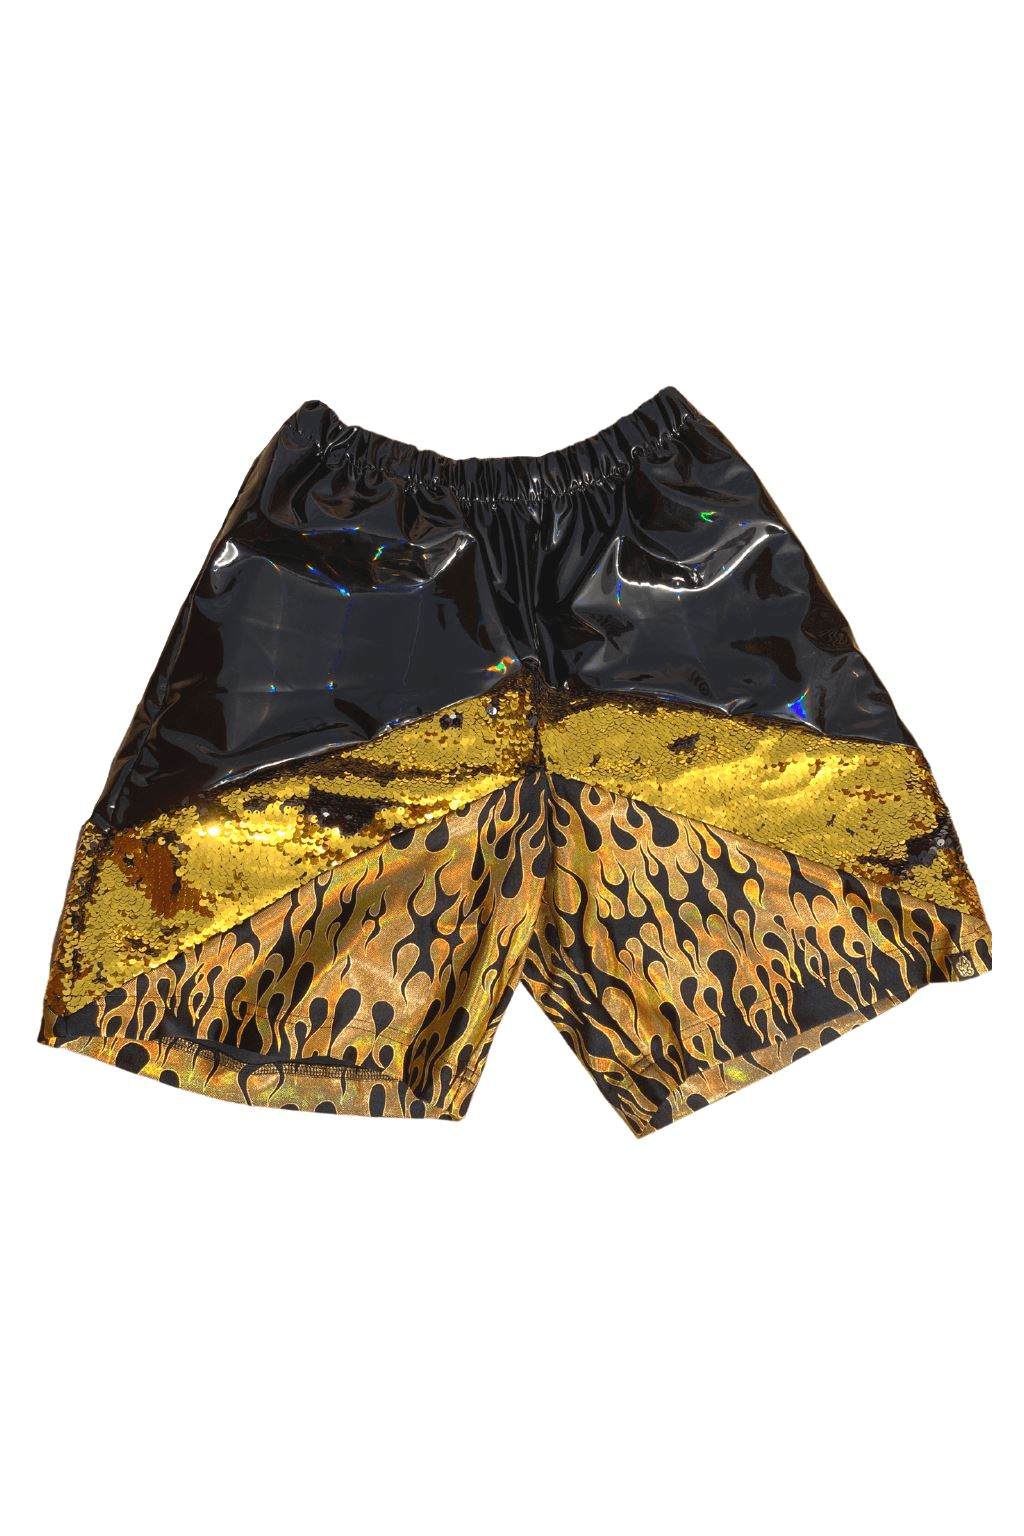 Mens holographic black and gold sequin festival shorts with flame print and pockets by Love Khaos